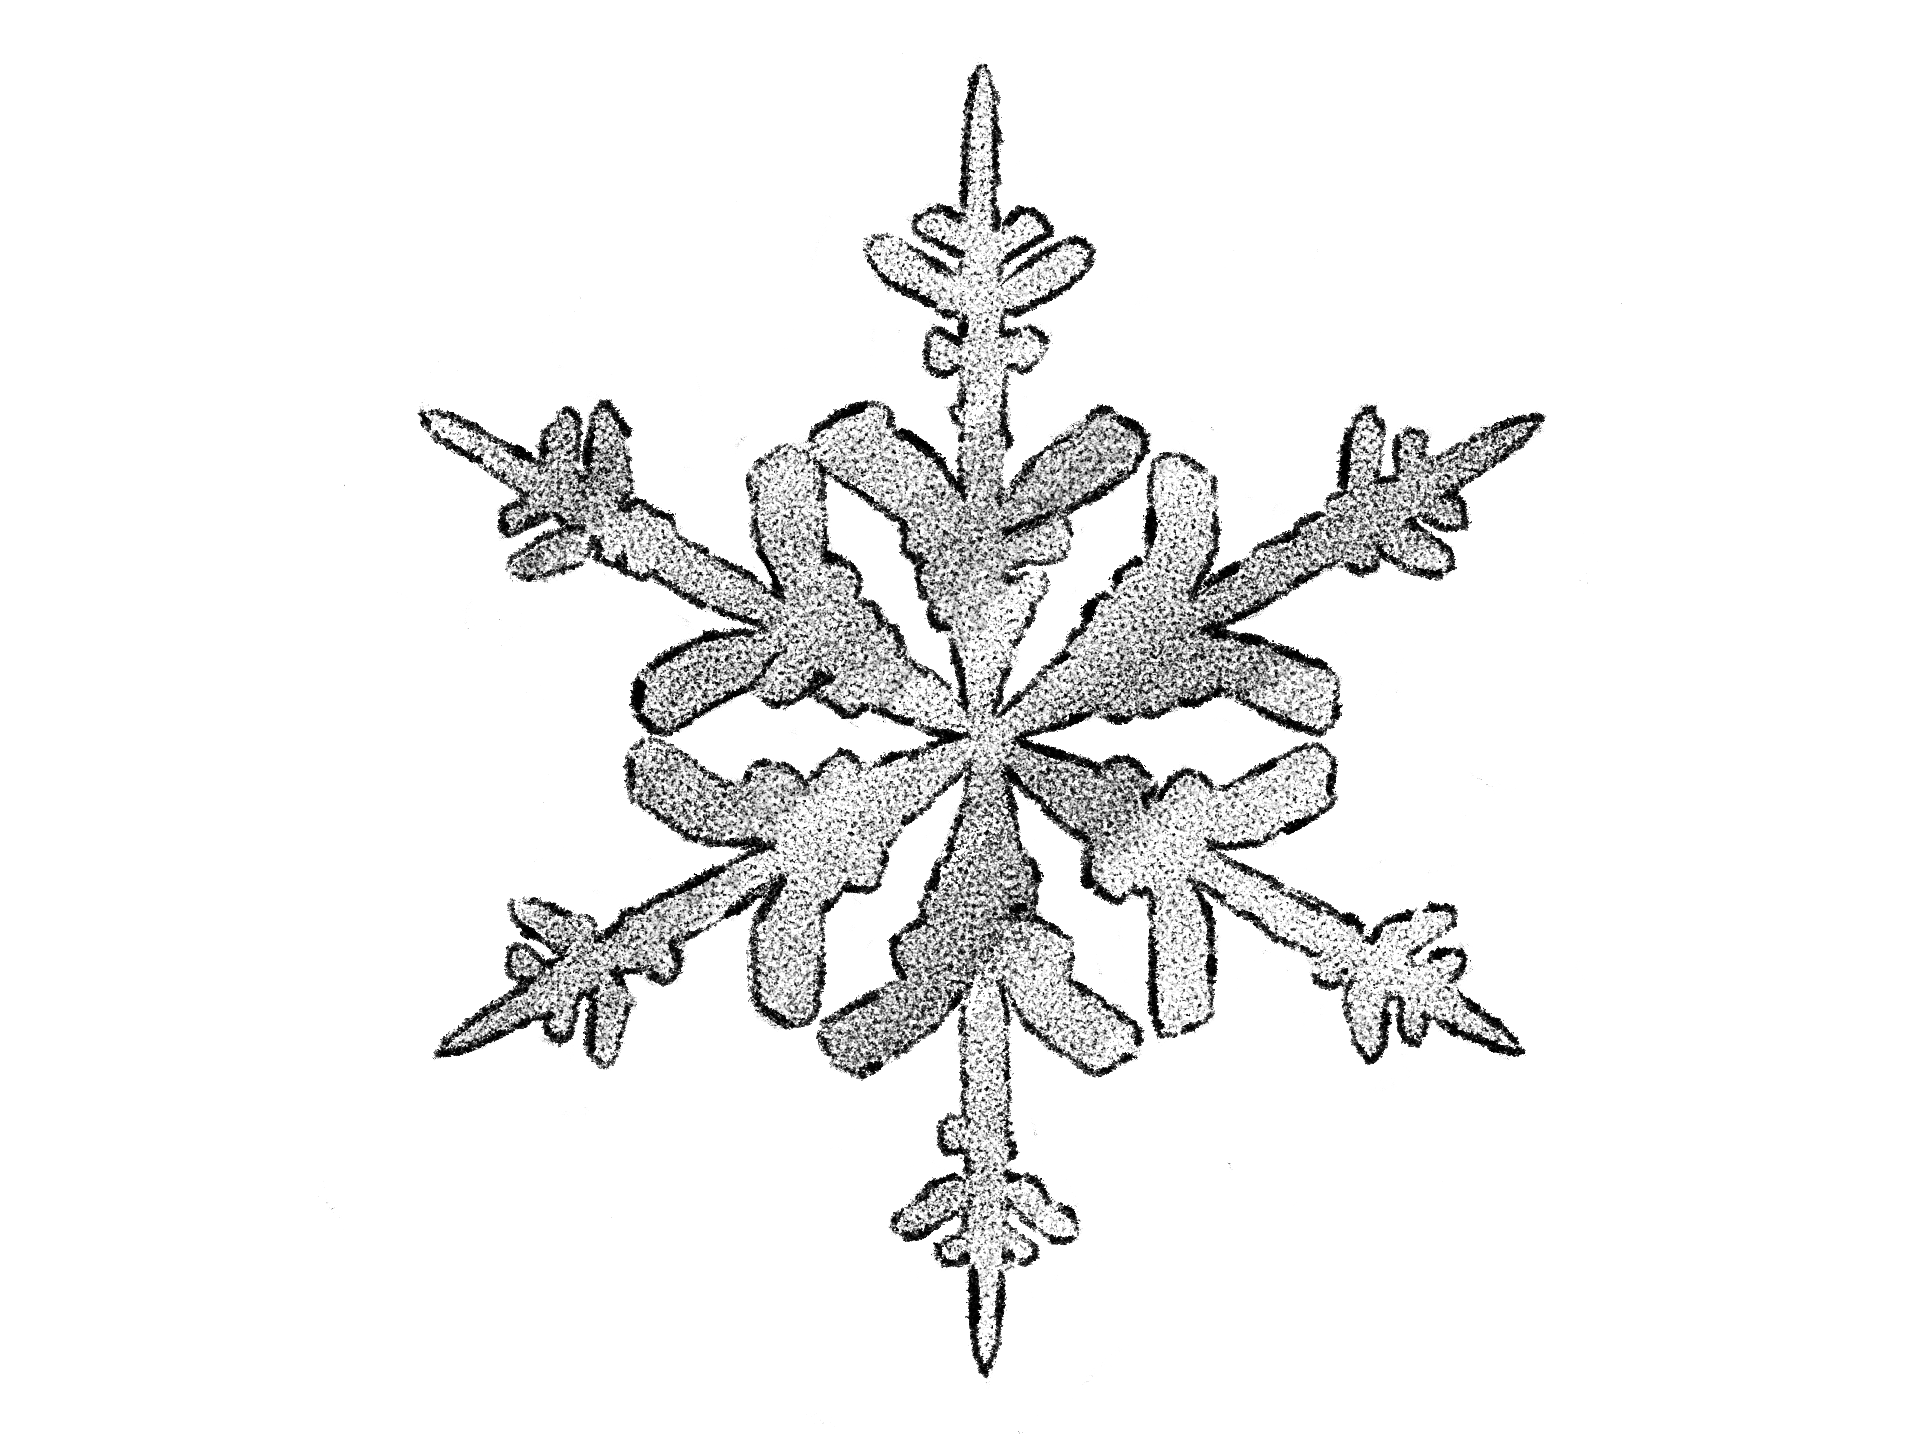 Illustration of a snowflake, from How many clouds must gather to fall such bountiful snow?, a short story